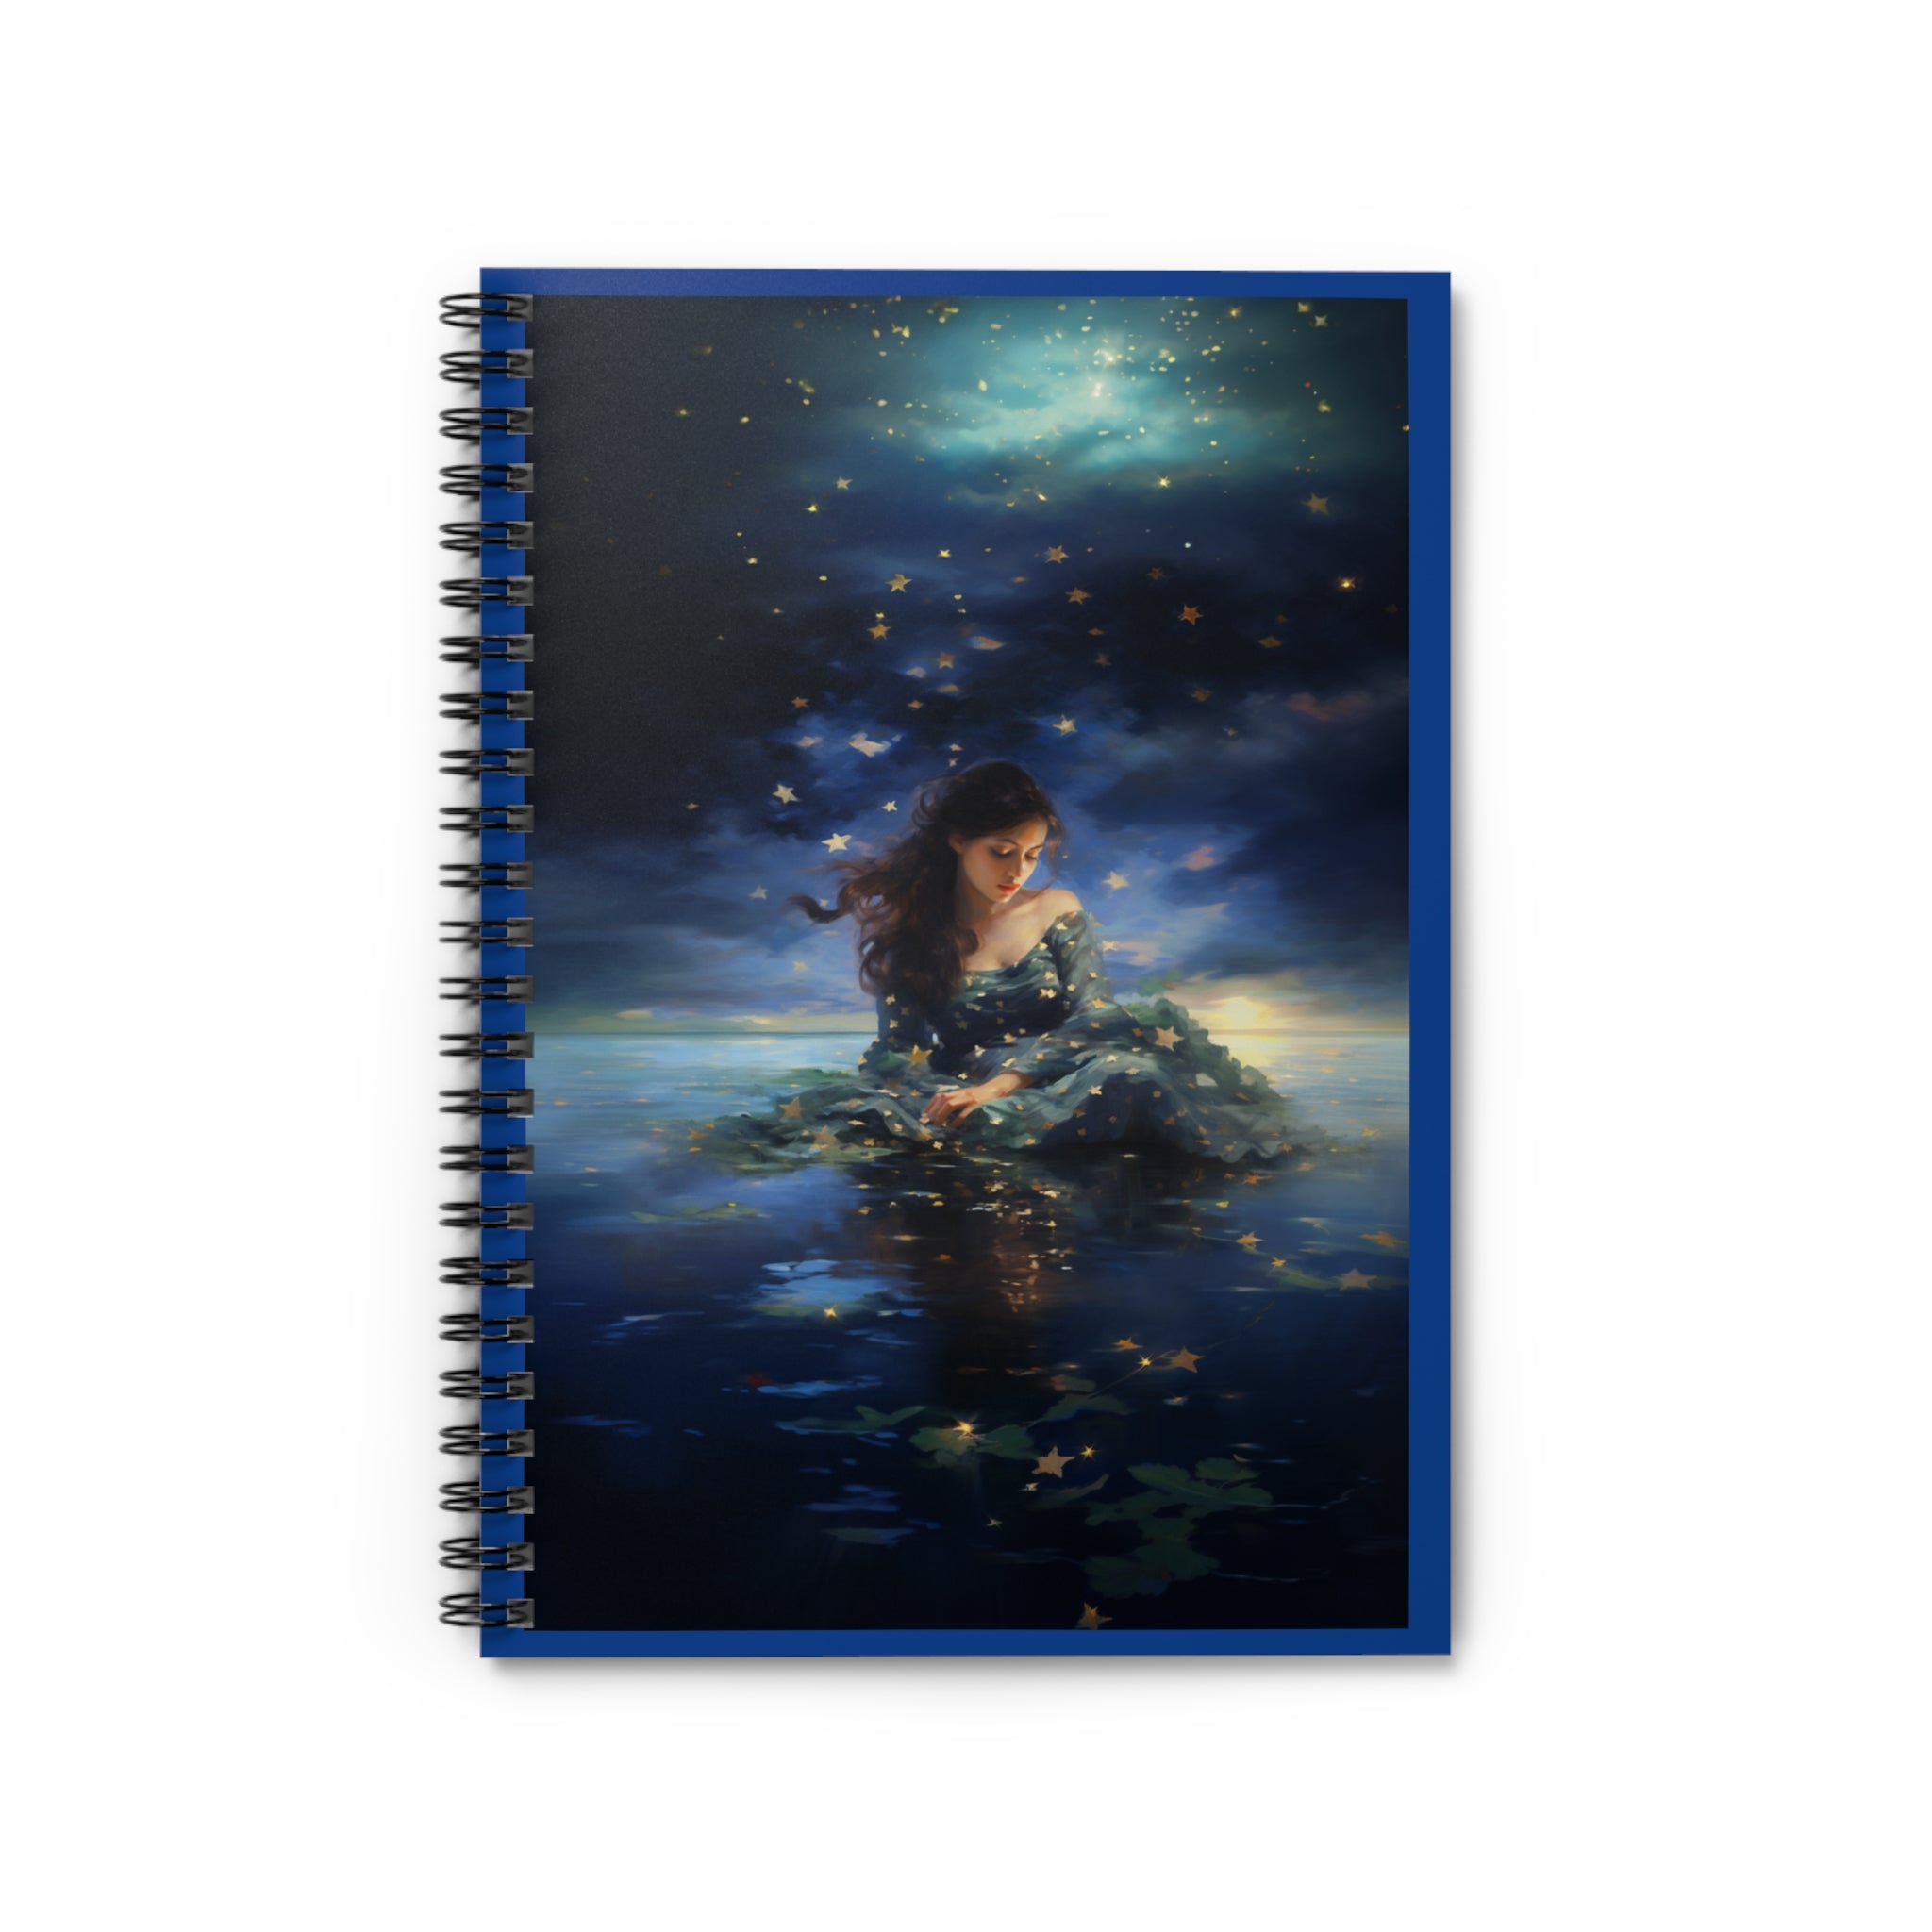 Starry Skies and Water Reflections - Spiral Notebook - Ruled Line - Spruced Roost